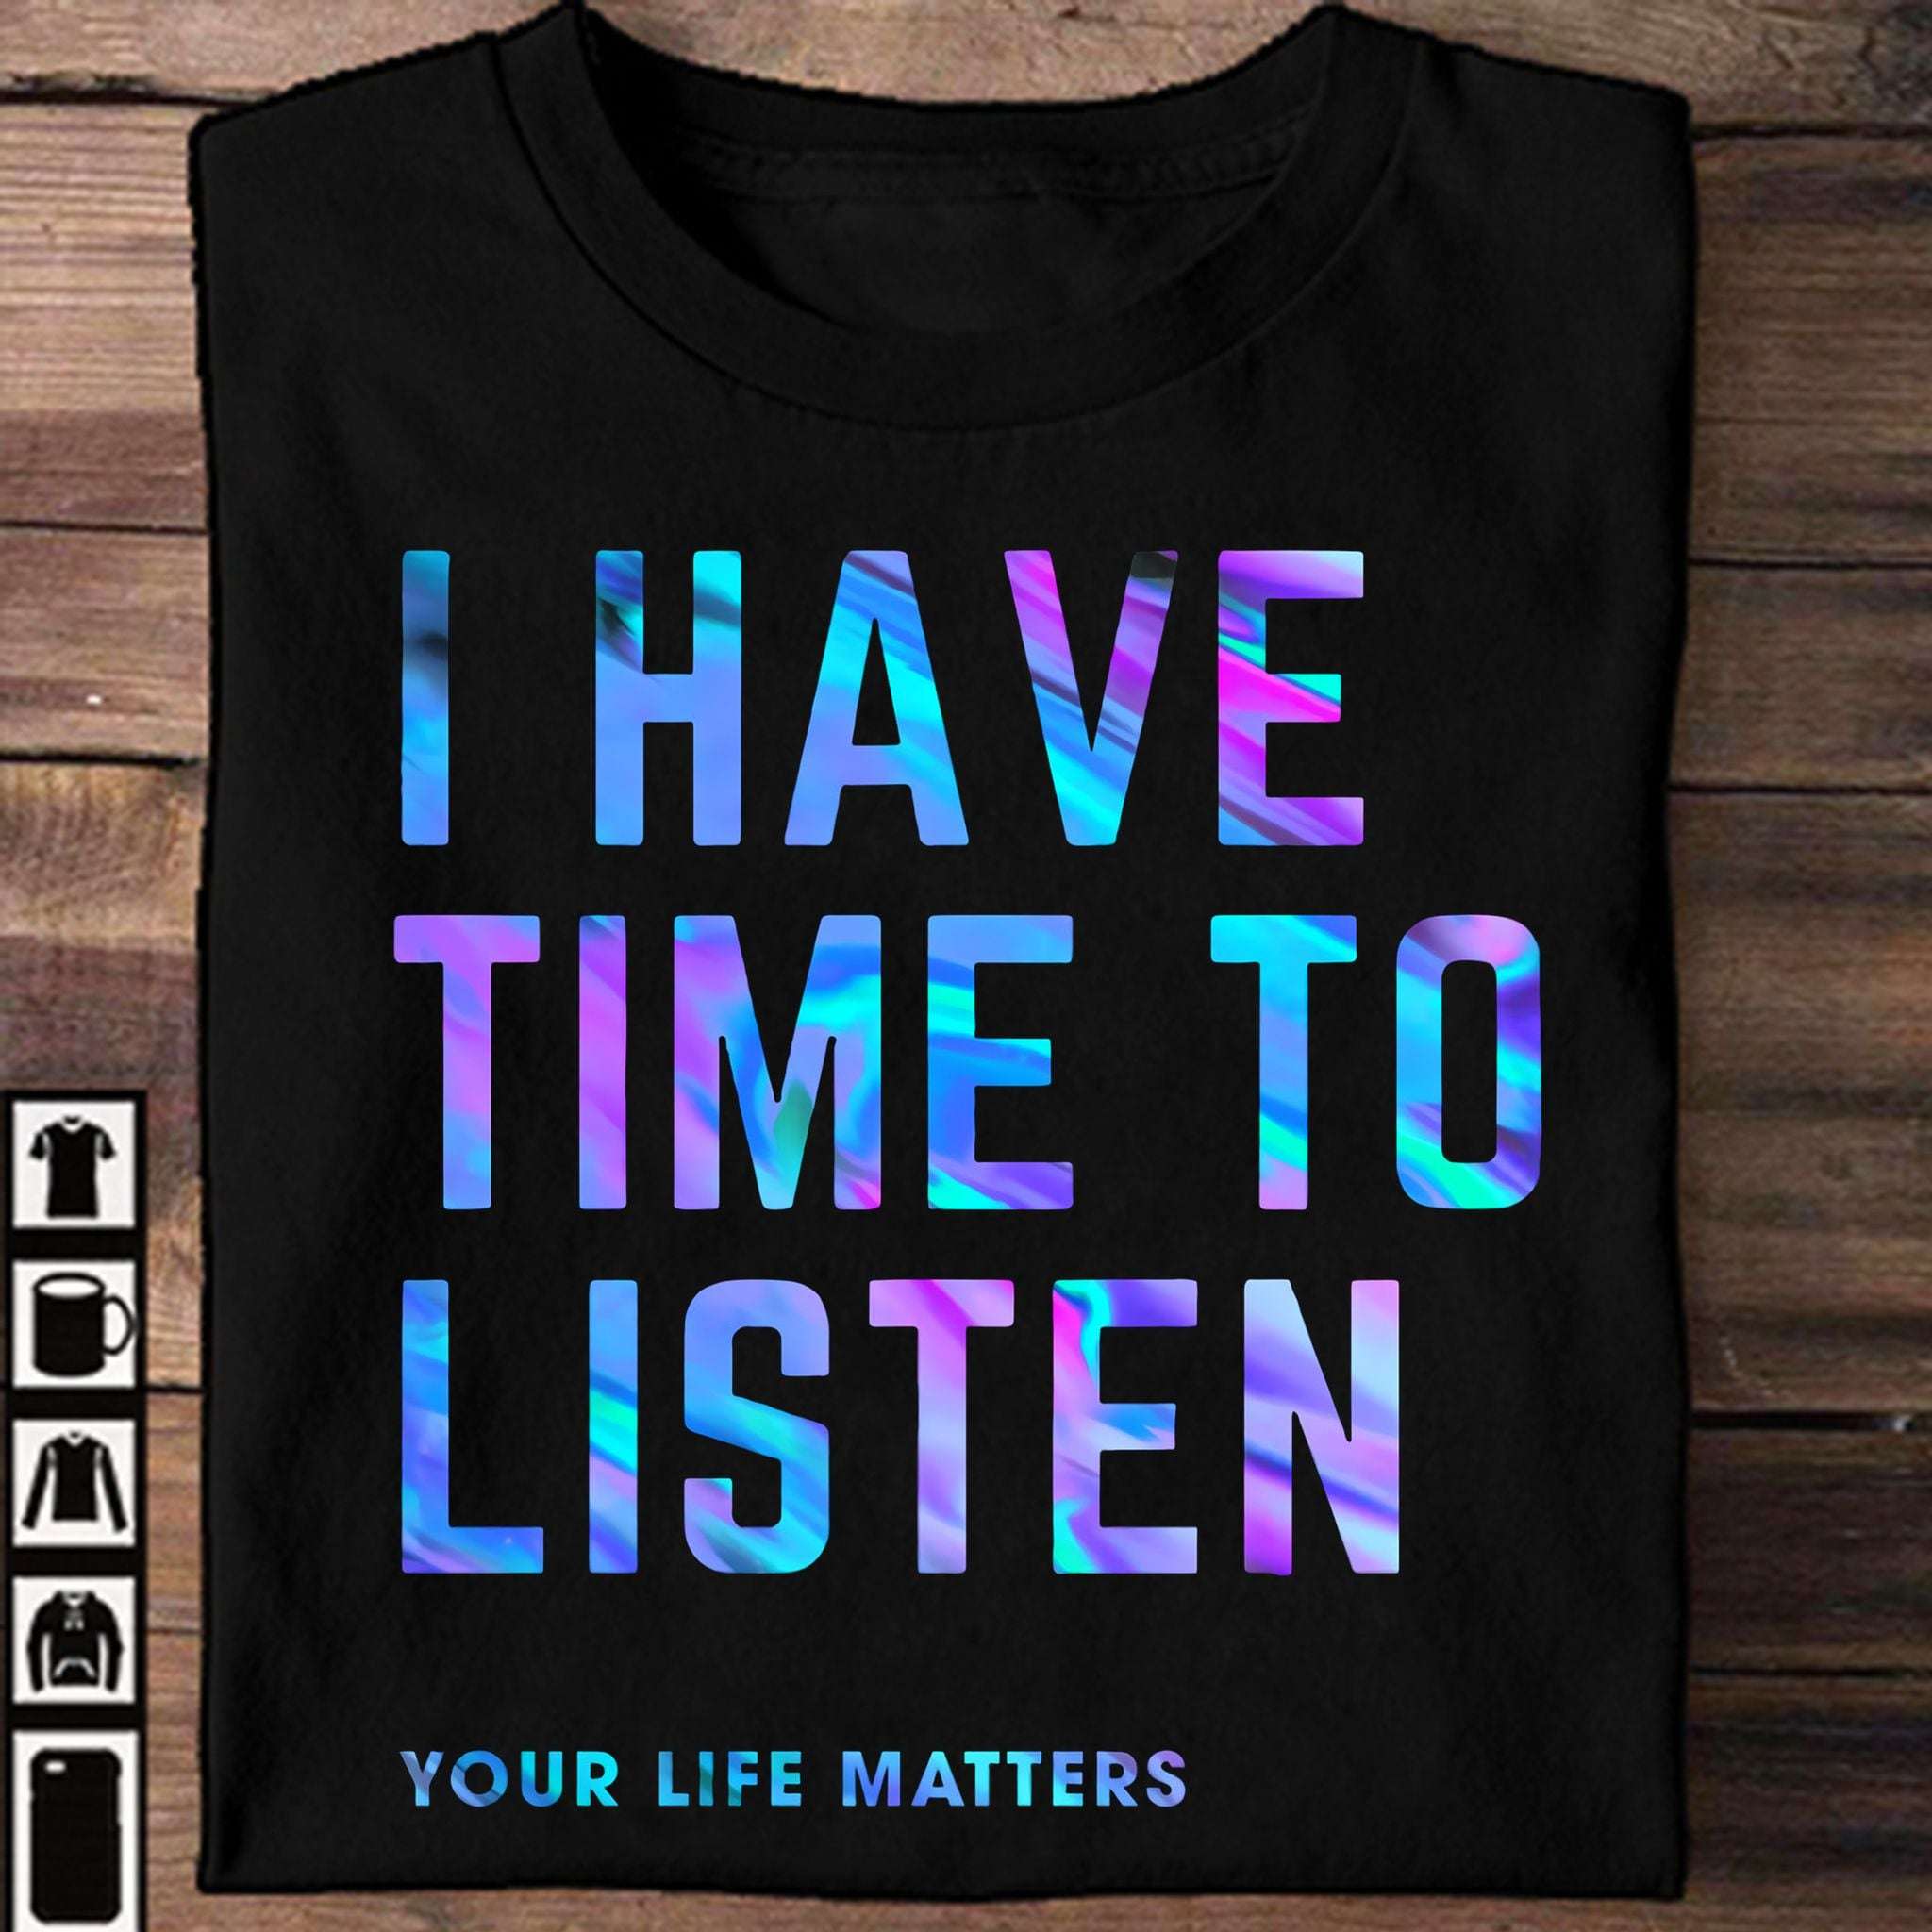 I have time to listen - your life matters, suicide prevention awareness